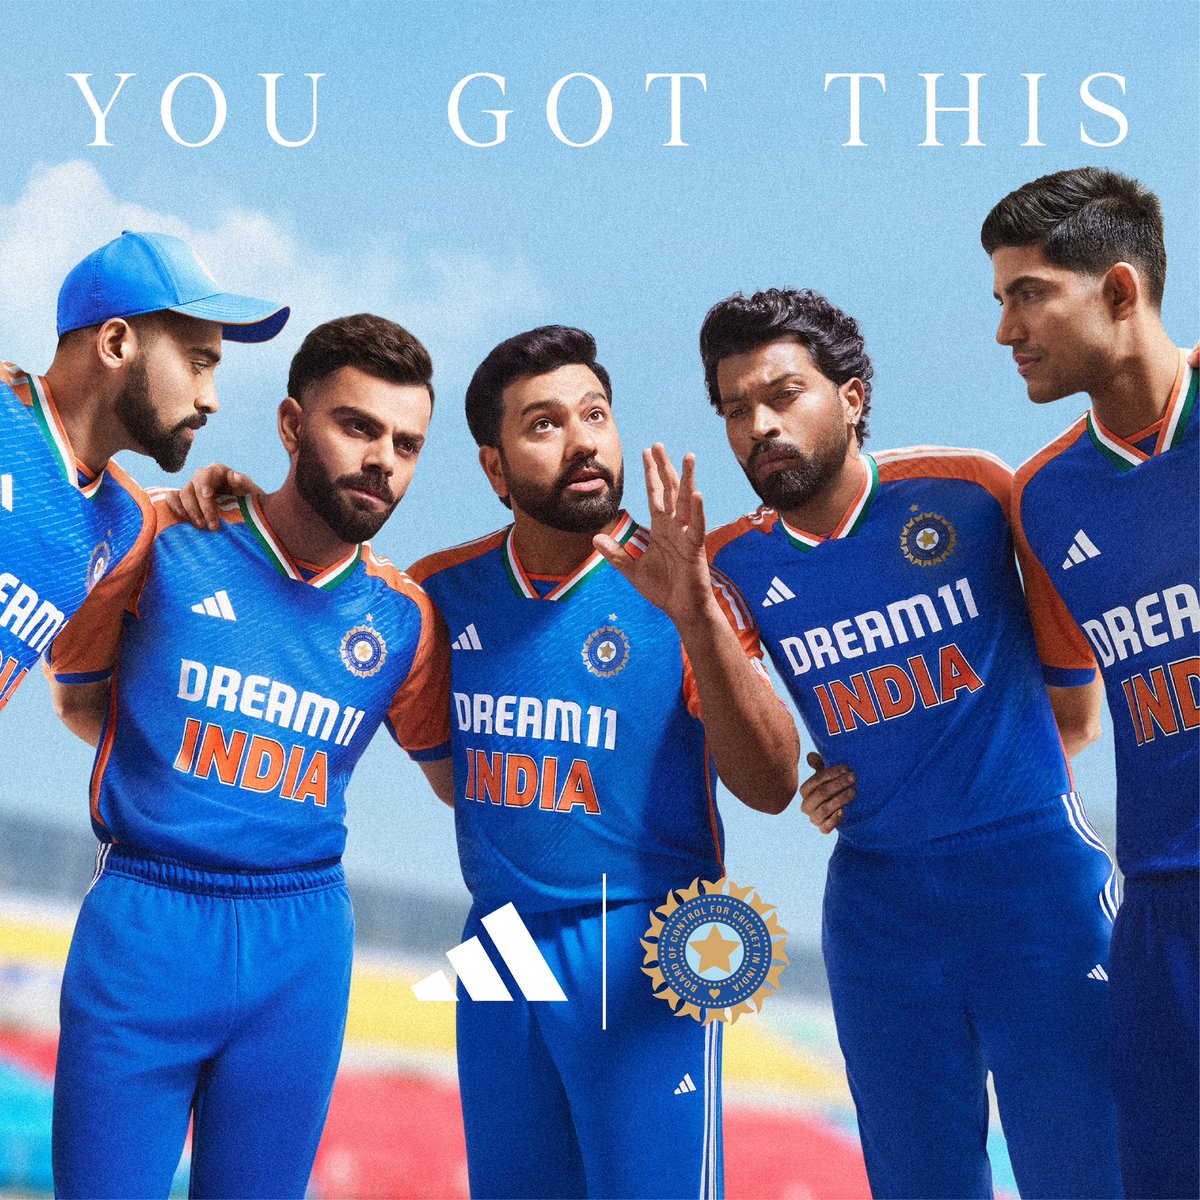 It’s only beating the world. #YouGotThis. The new team India t20 jersey is now available in stores across India and on adidas.co.in #T20WorldCup